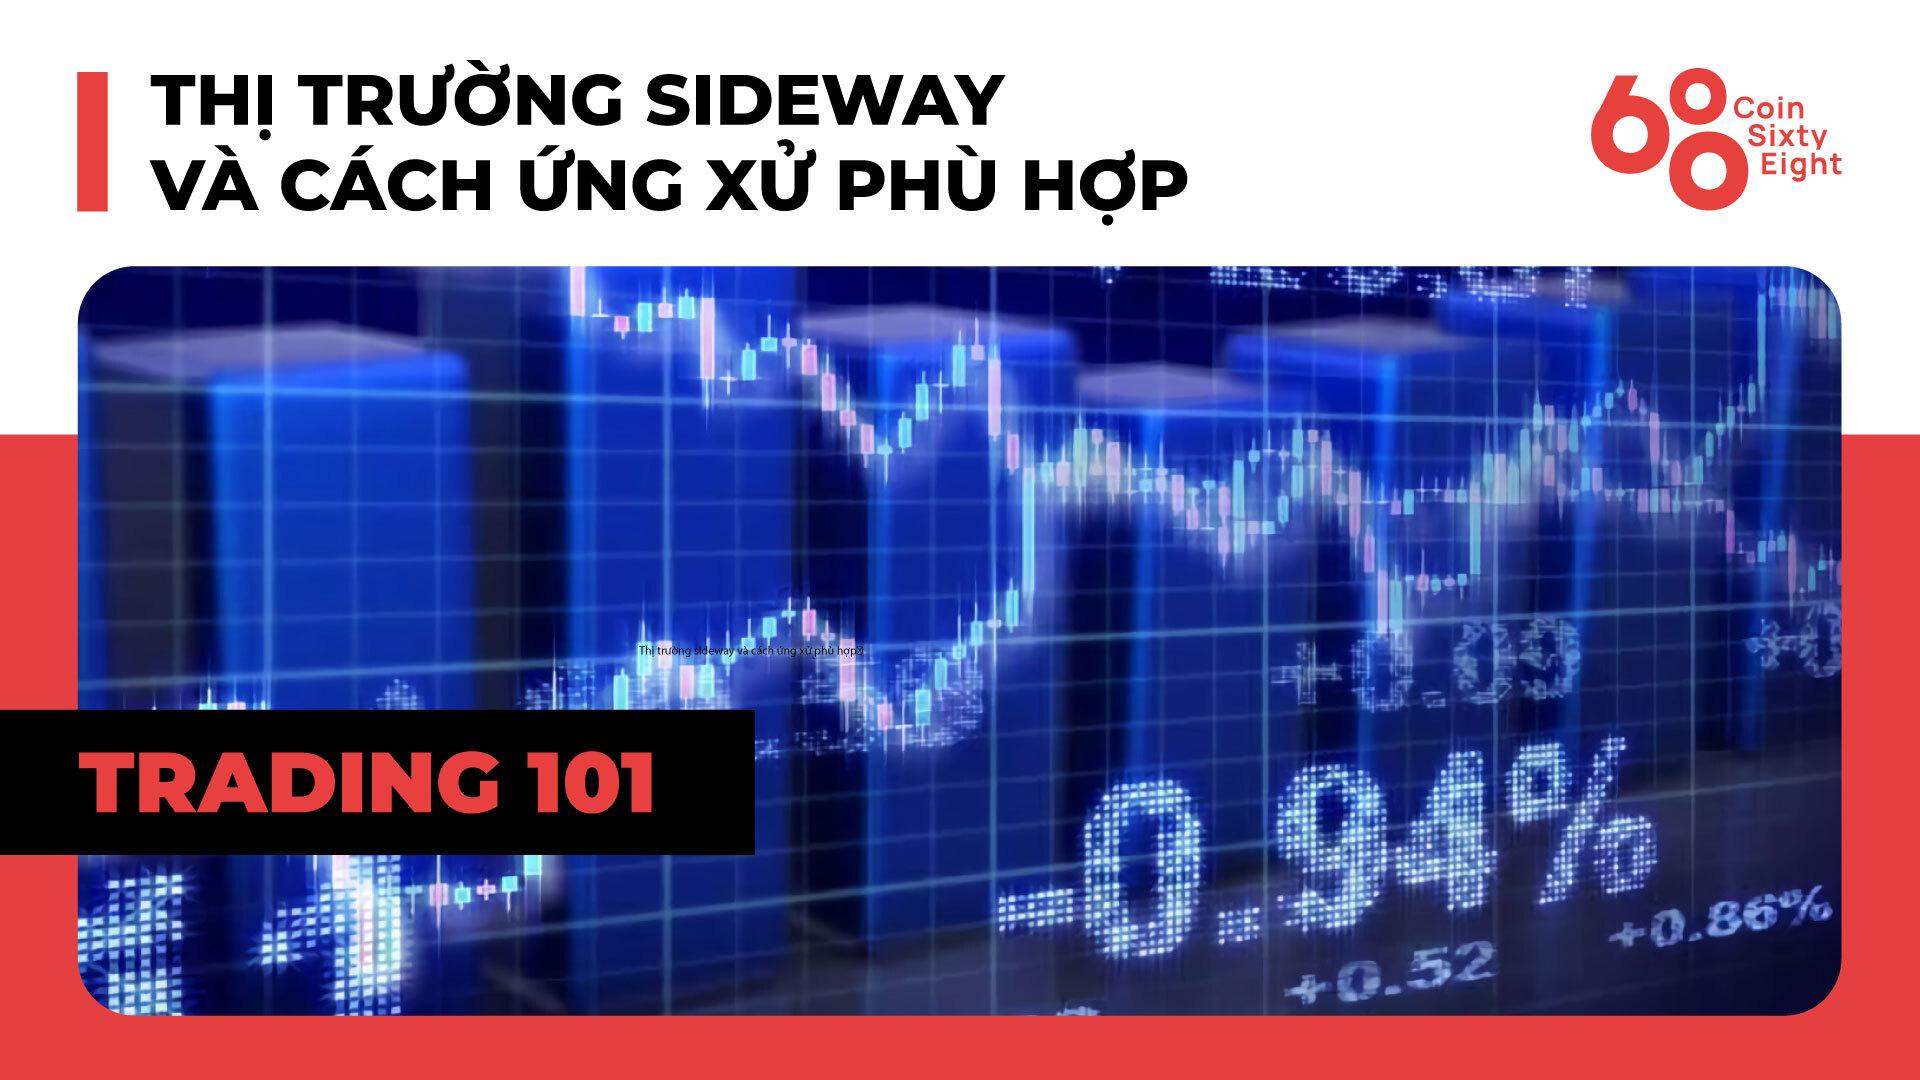 lop-giao-dich-101-price-action-trading-phan-14-thi-truong-sideway-va-cach-ung-xu-phu-hop